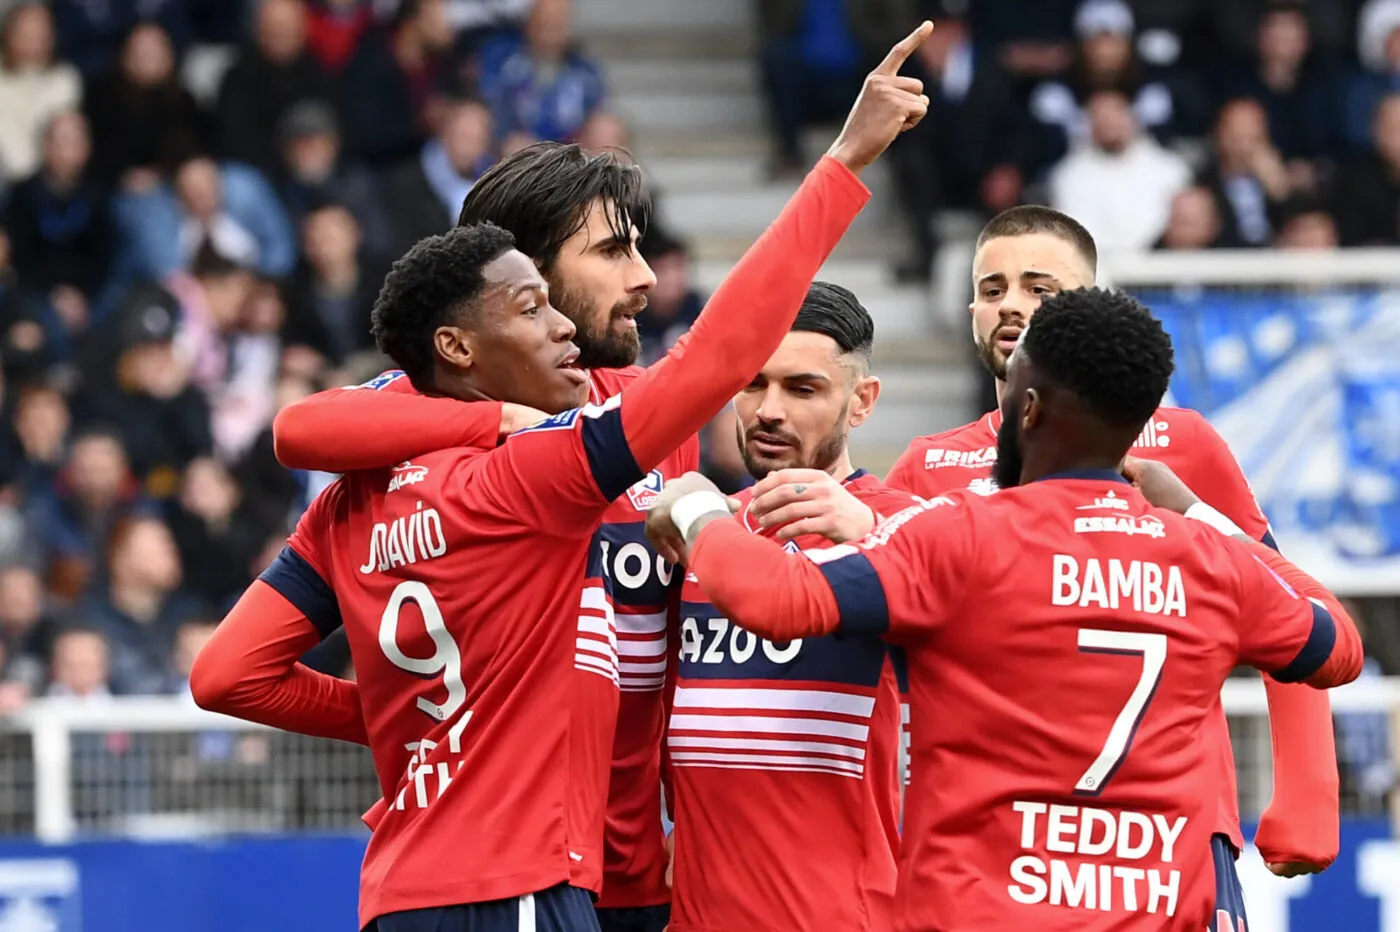 09 Jonathan Christian DAVID (losc) - 28 Andre GOMES (losc) during the Ligue 1 Uber Eats match between Auxerre and Lille at Stade Abbe Deschamps on April 22, 2023 in Auxerre, France. (Photo by Christophe Saidi/FEP/Icon Sport)